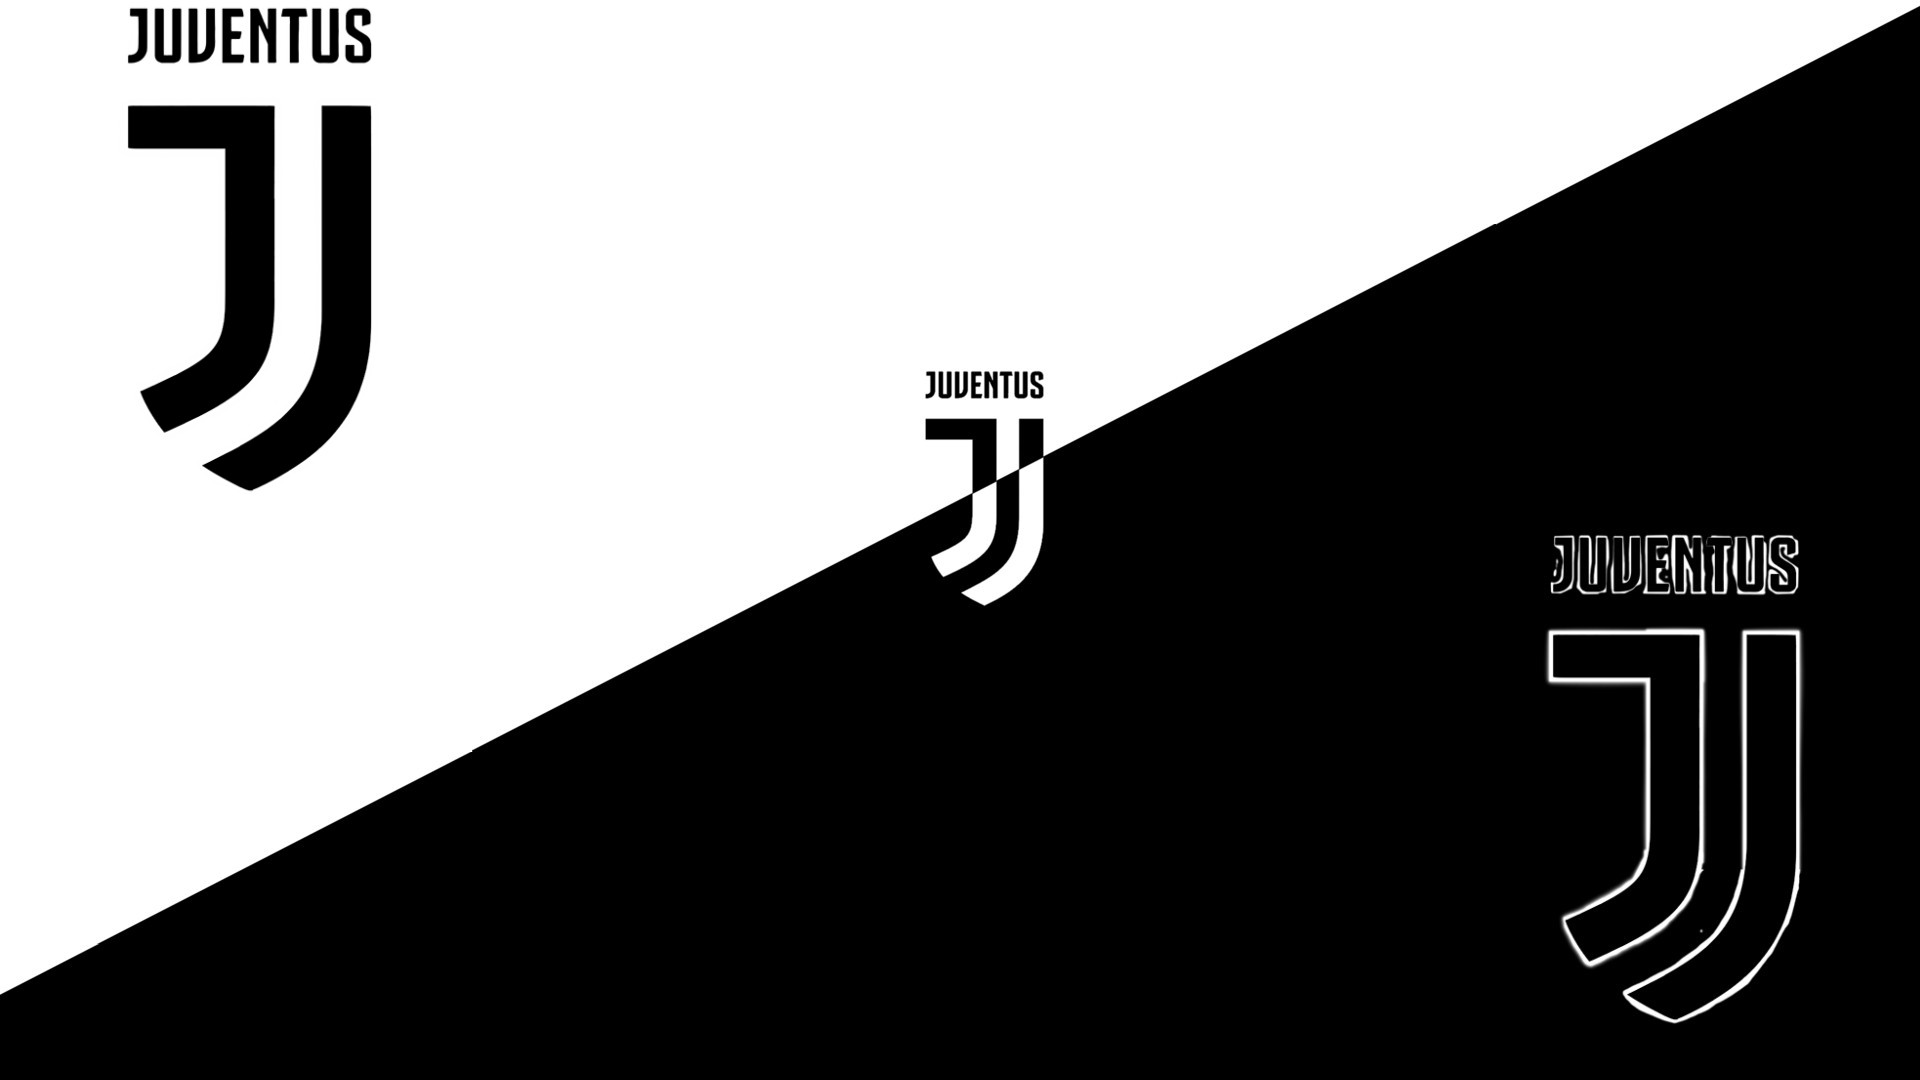 Juventus Desktop Wallpapers With Resolution 1920X1080 pixel. You can make this wallpaper for your Mac or Windows Desktop Background, iPhone, Android or Tablet and another Smartphone device for free